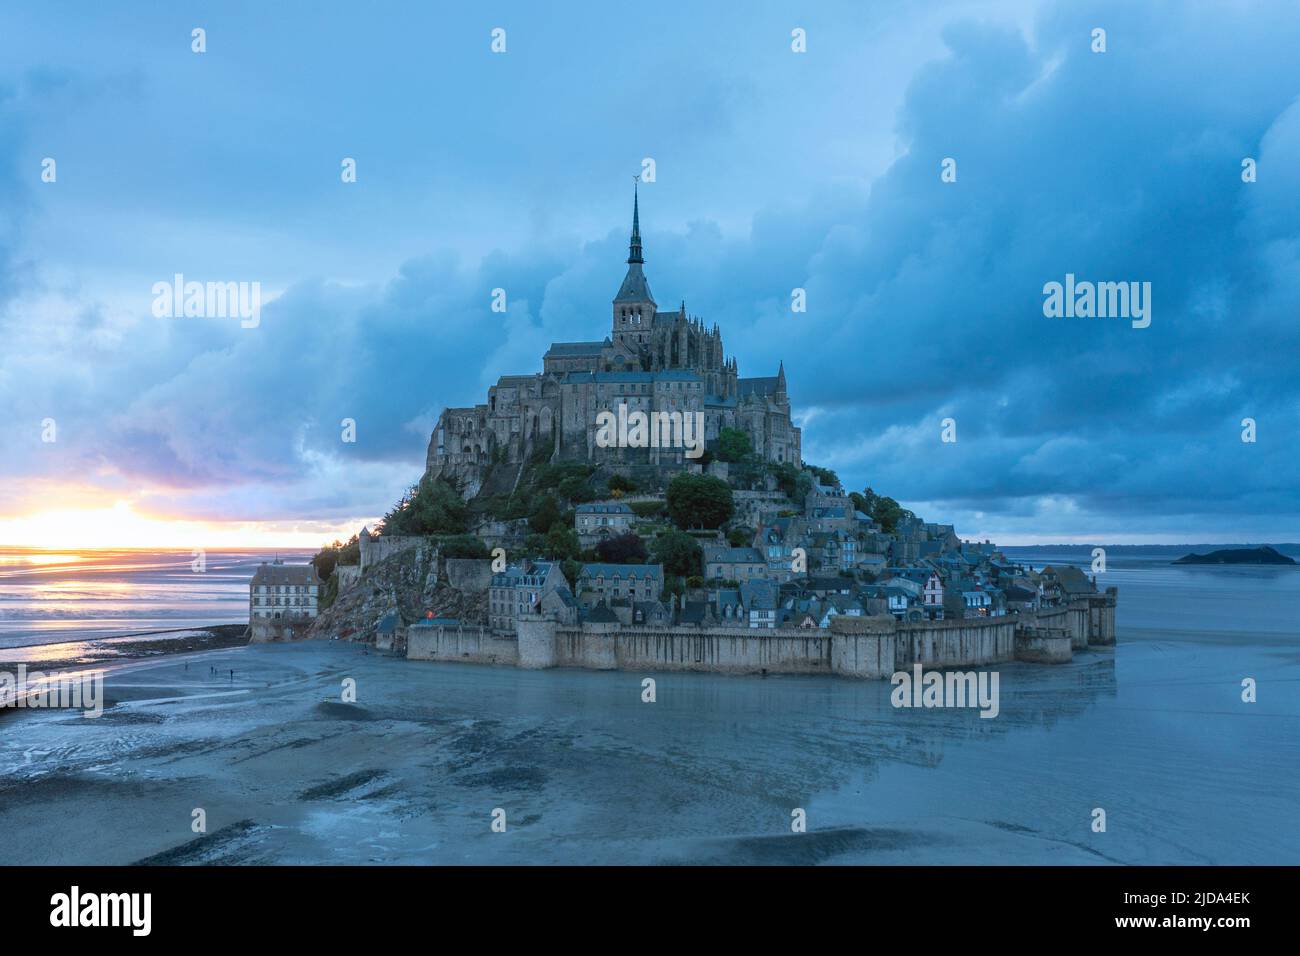 Sunset view of Le Mont Saint Michel (Saint Michael's Mount), a small, rocky tidal island, famous for its medieval abbey, Normandy, France. Stock Photo